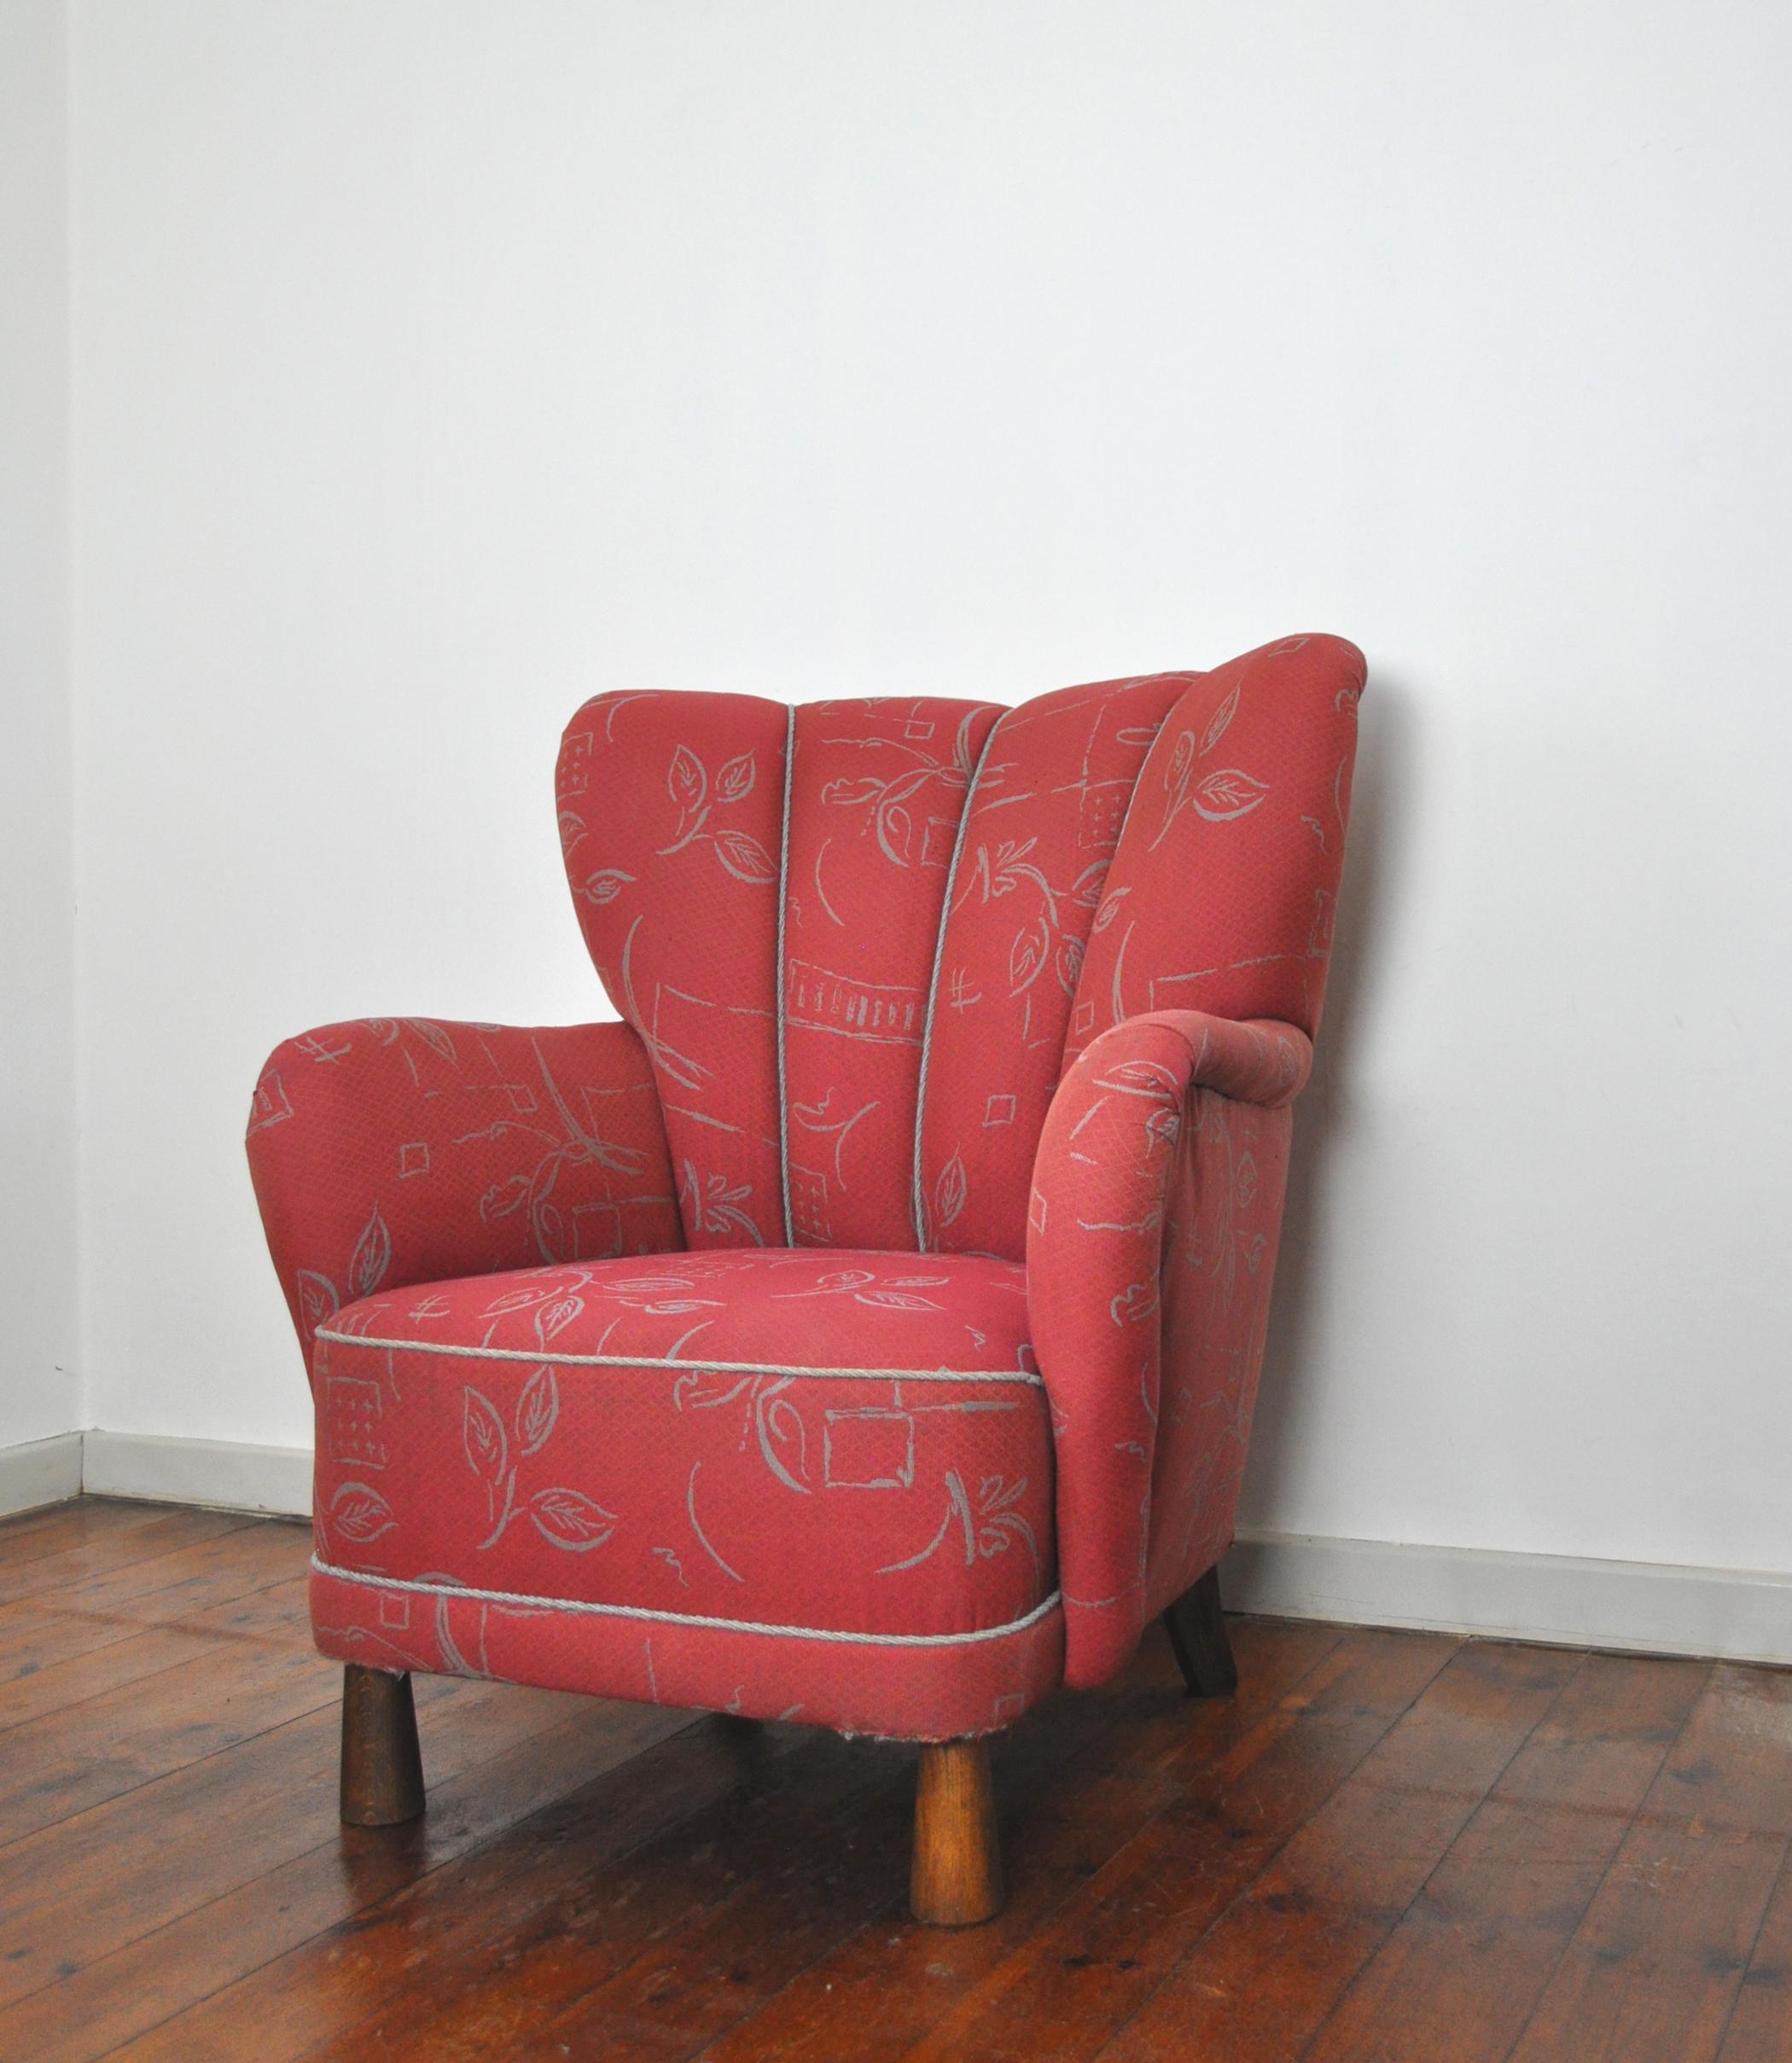 An early modernist form Danish wingback lounge chair with cone-shaped legs in the front. Over-stuffed form, enveloping the sitter with original red wool upholstery with a fine pattern typical of the period.
Contemporary to works from the 1940s by